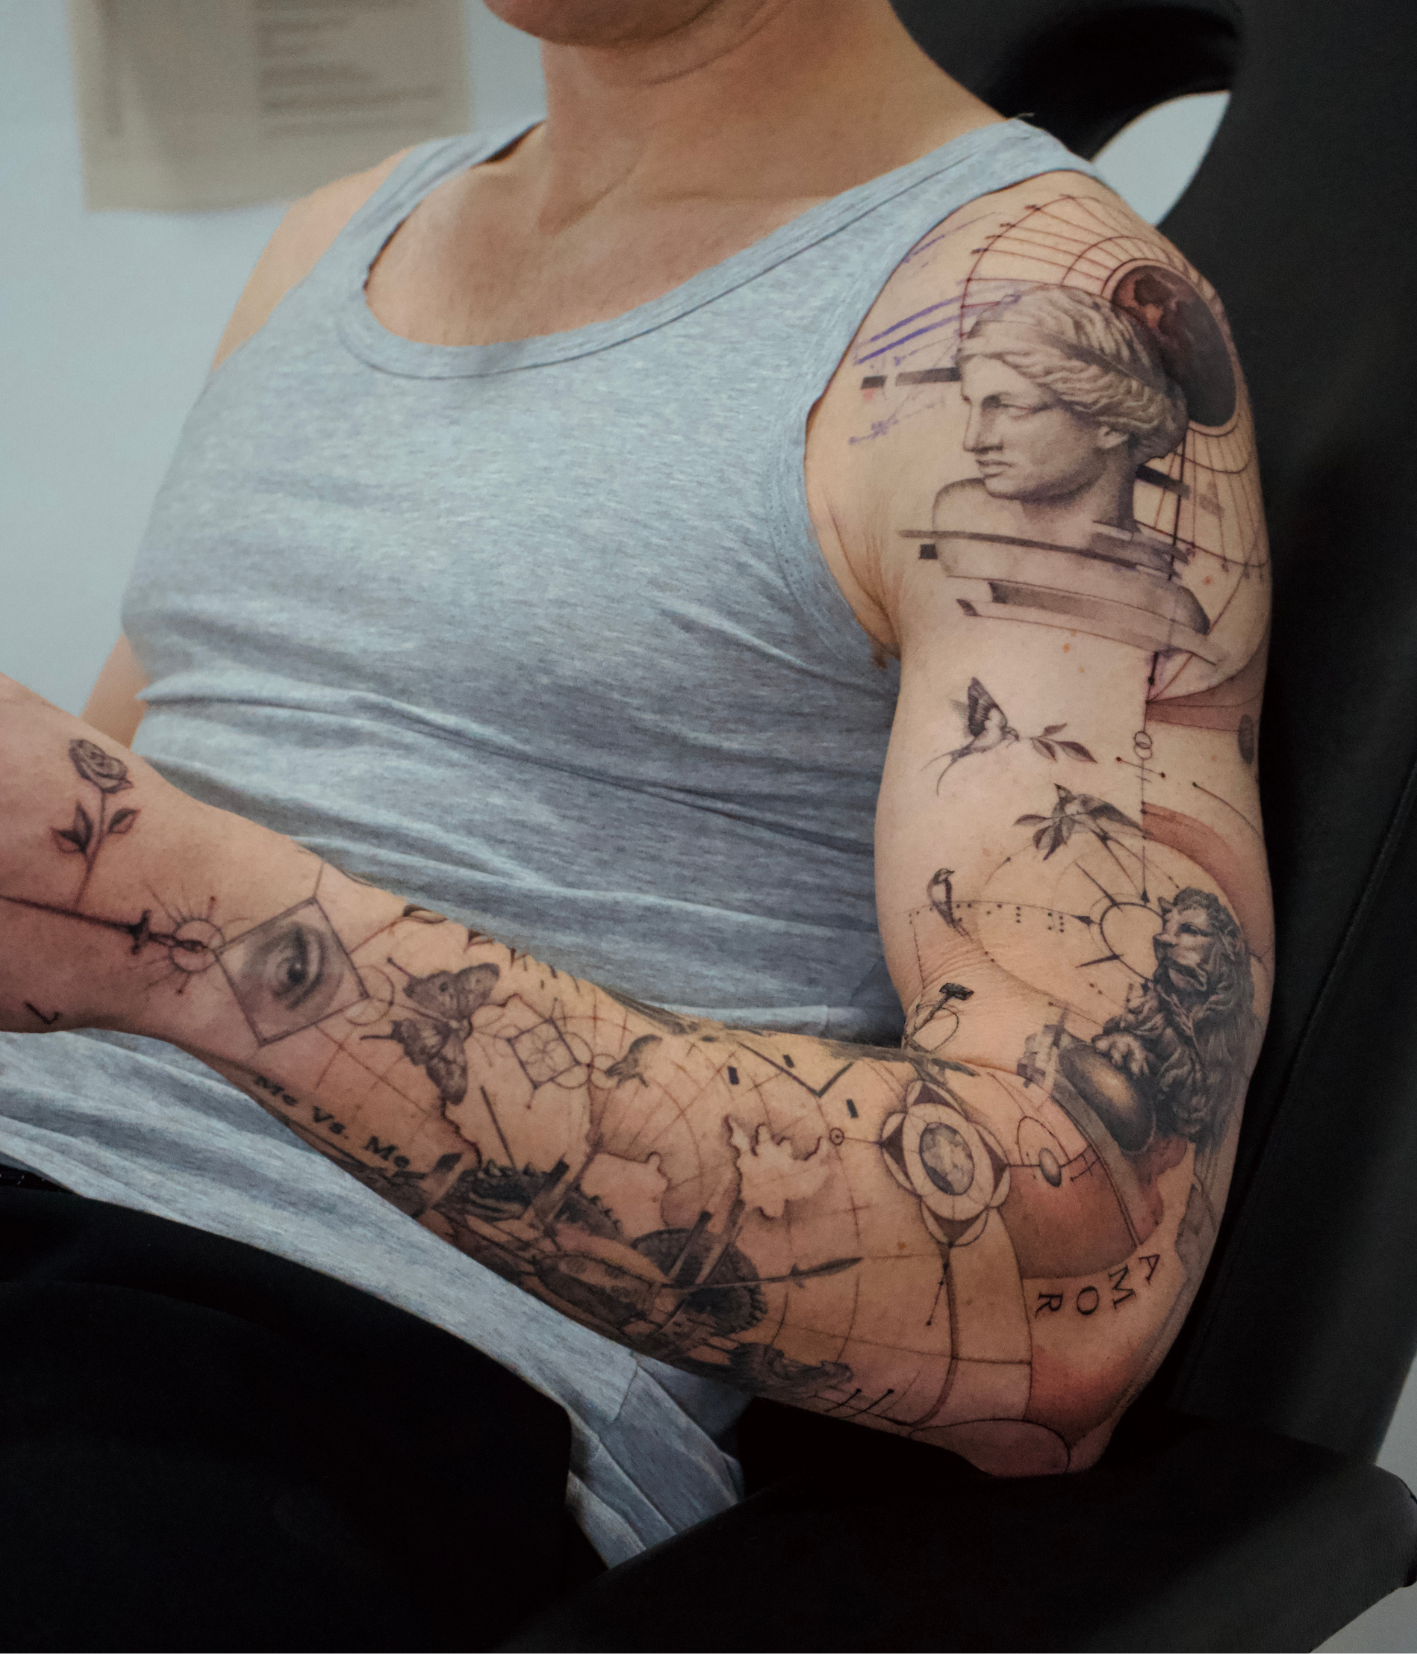 Realism Tattoos: A Complete Guide With 85 Images - AuthorityTattoo